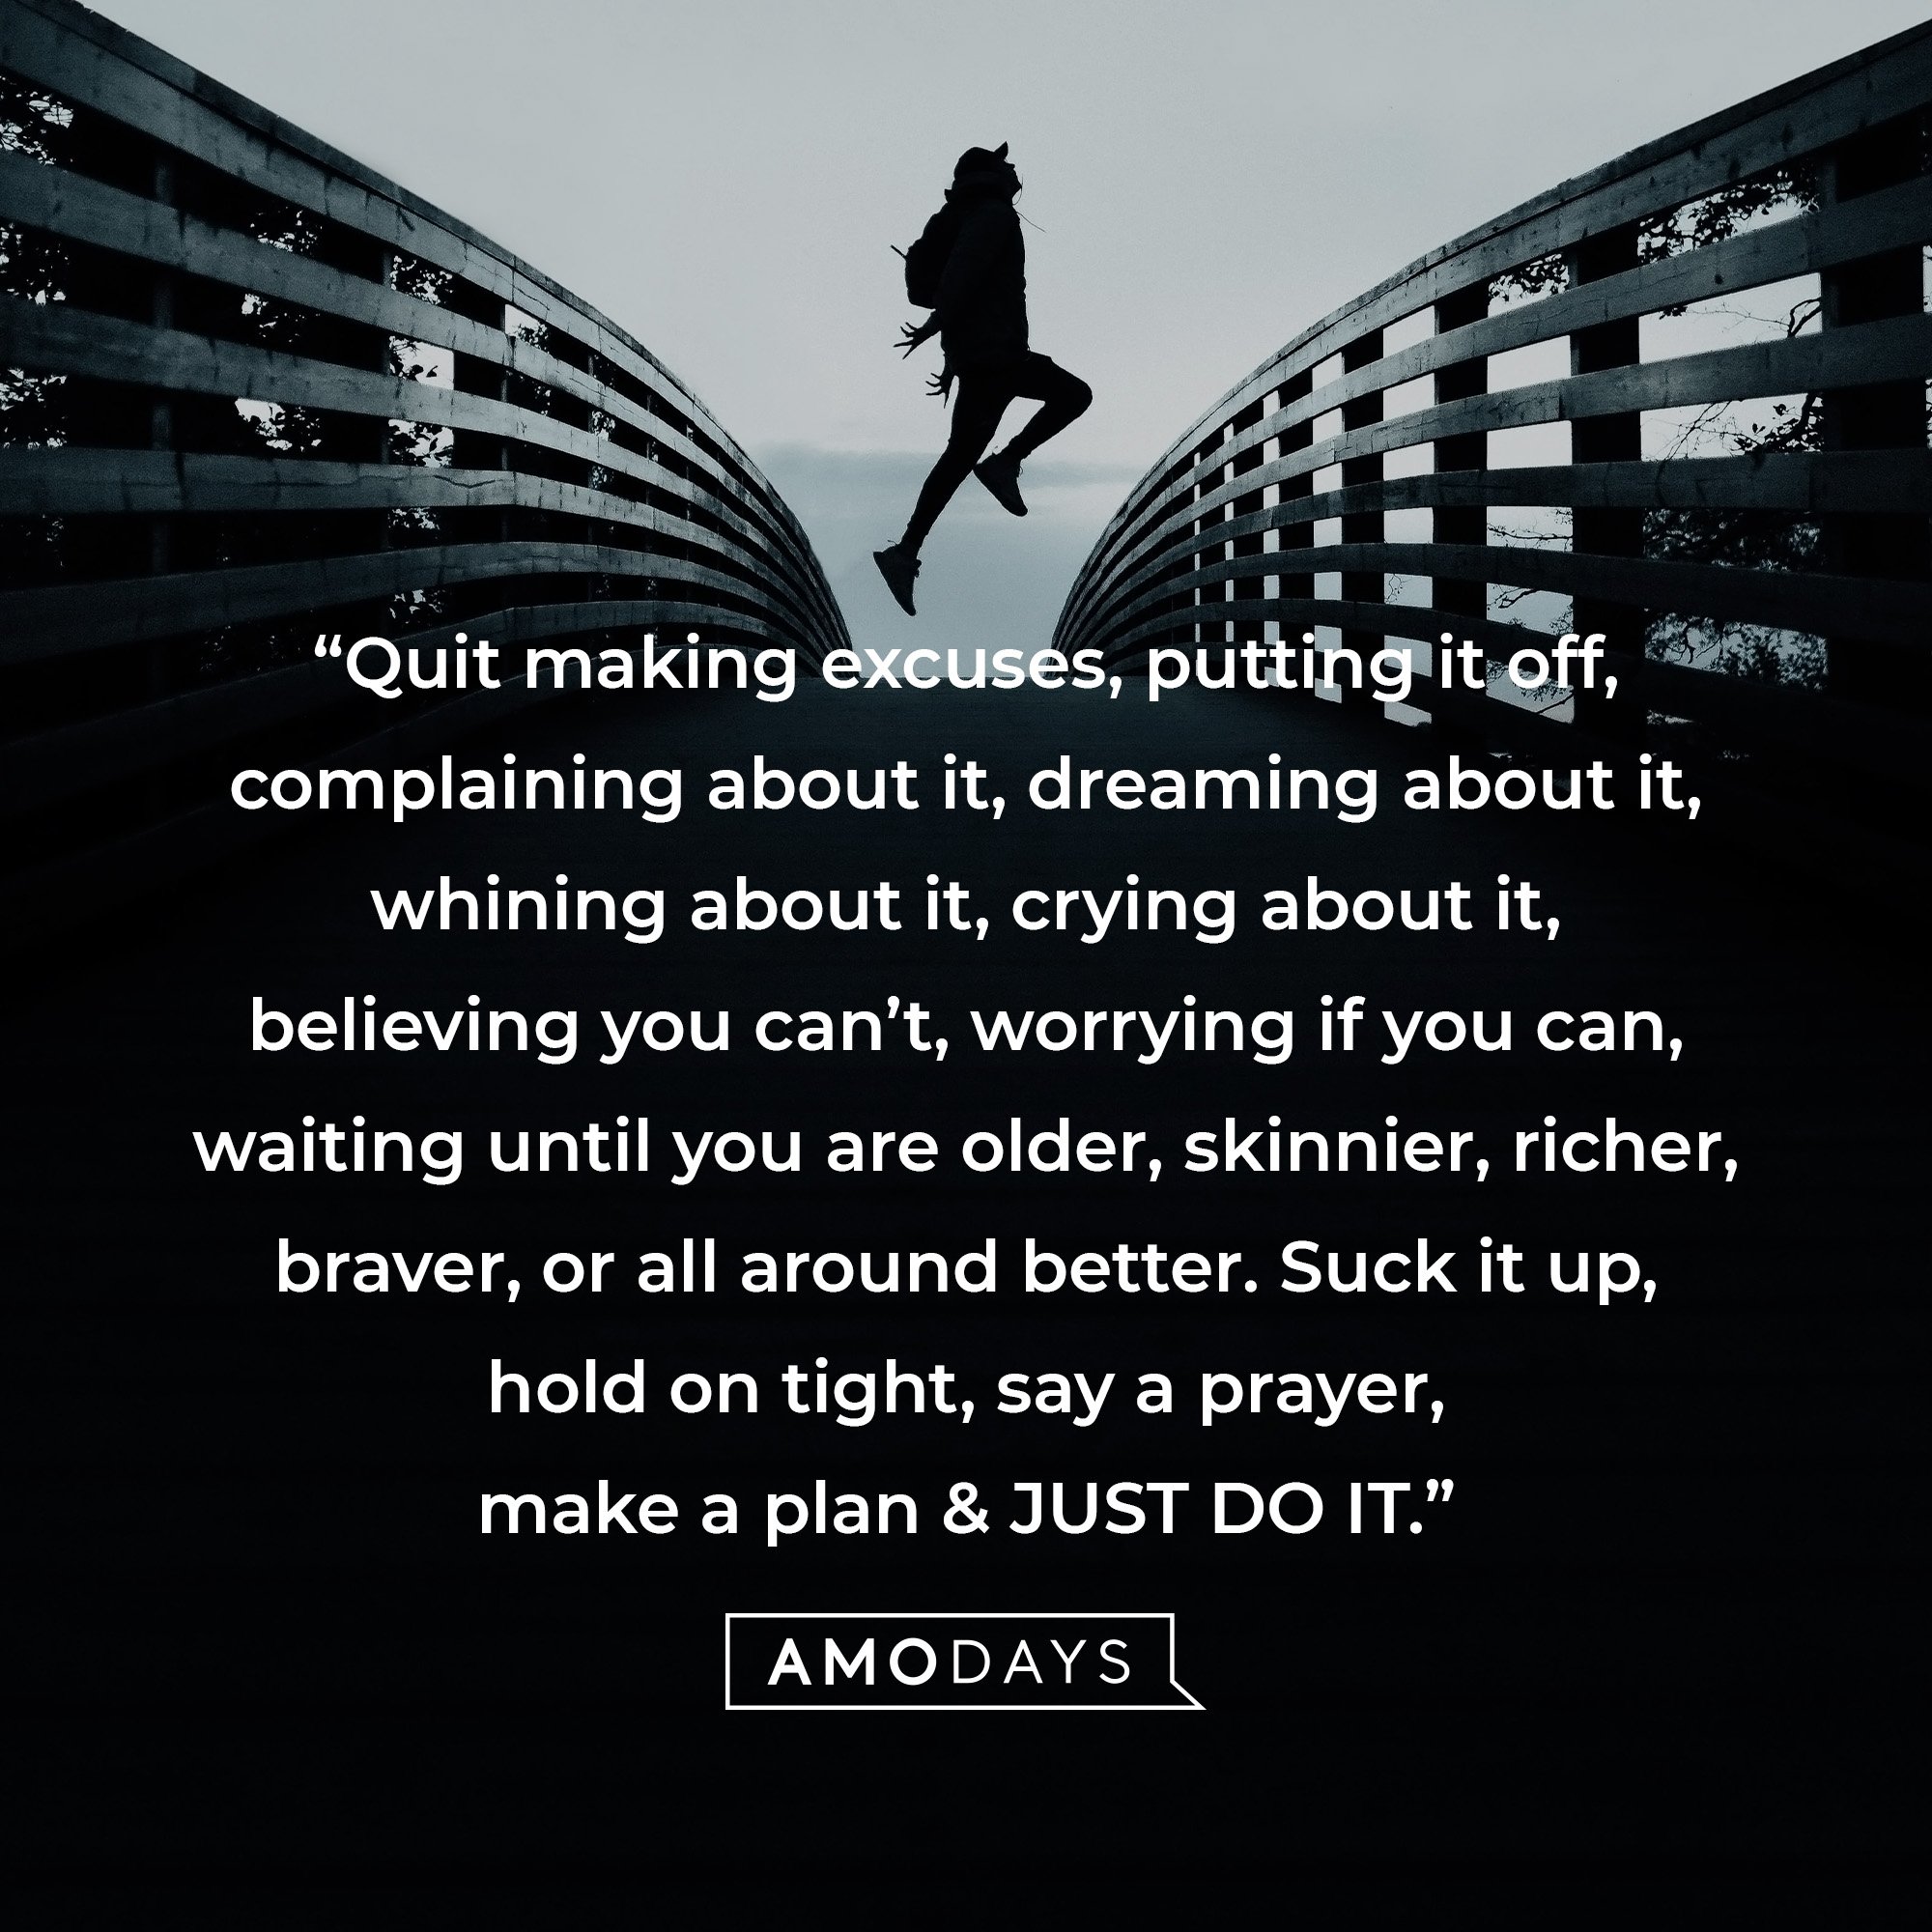 Nike’s quote: “Quit making excuses, putting it off, complaining about it, dreaming about it, whining about it, crying about it, believing you can’t, worrying if you can, waiting until you are older, skinnier, richer, braver, or all-around better. Suck it up, hold on tight, say a prayer, make a plan & JUST DO IT.” | Source: AmoDays